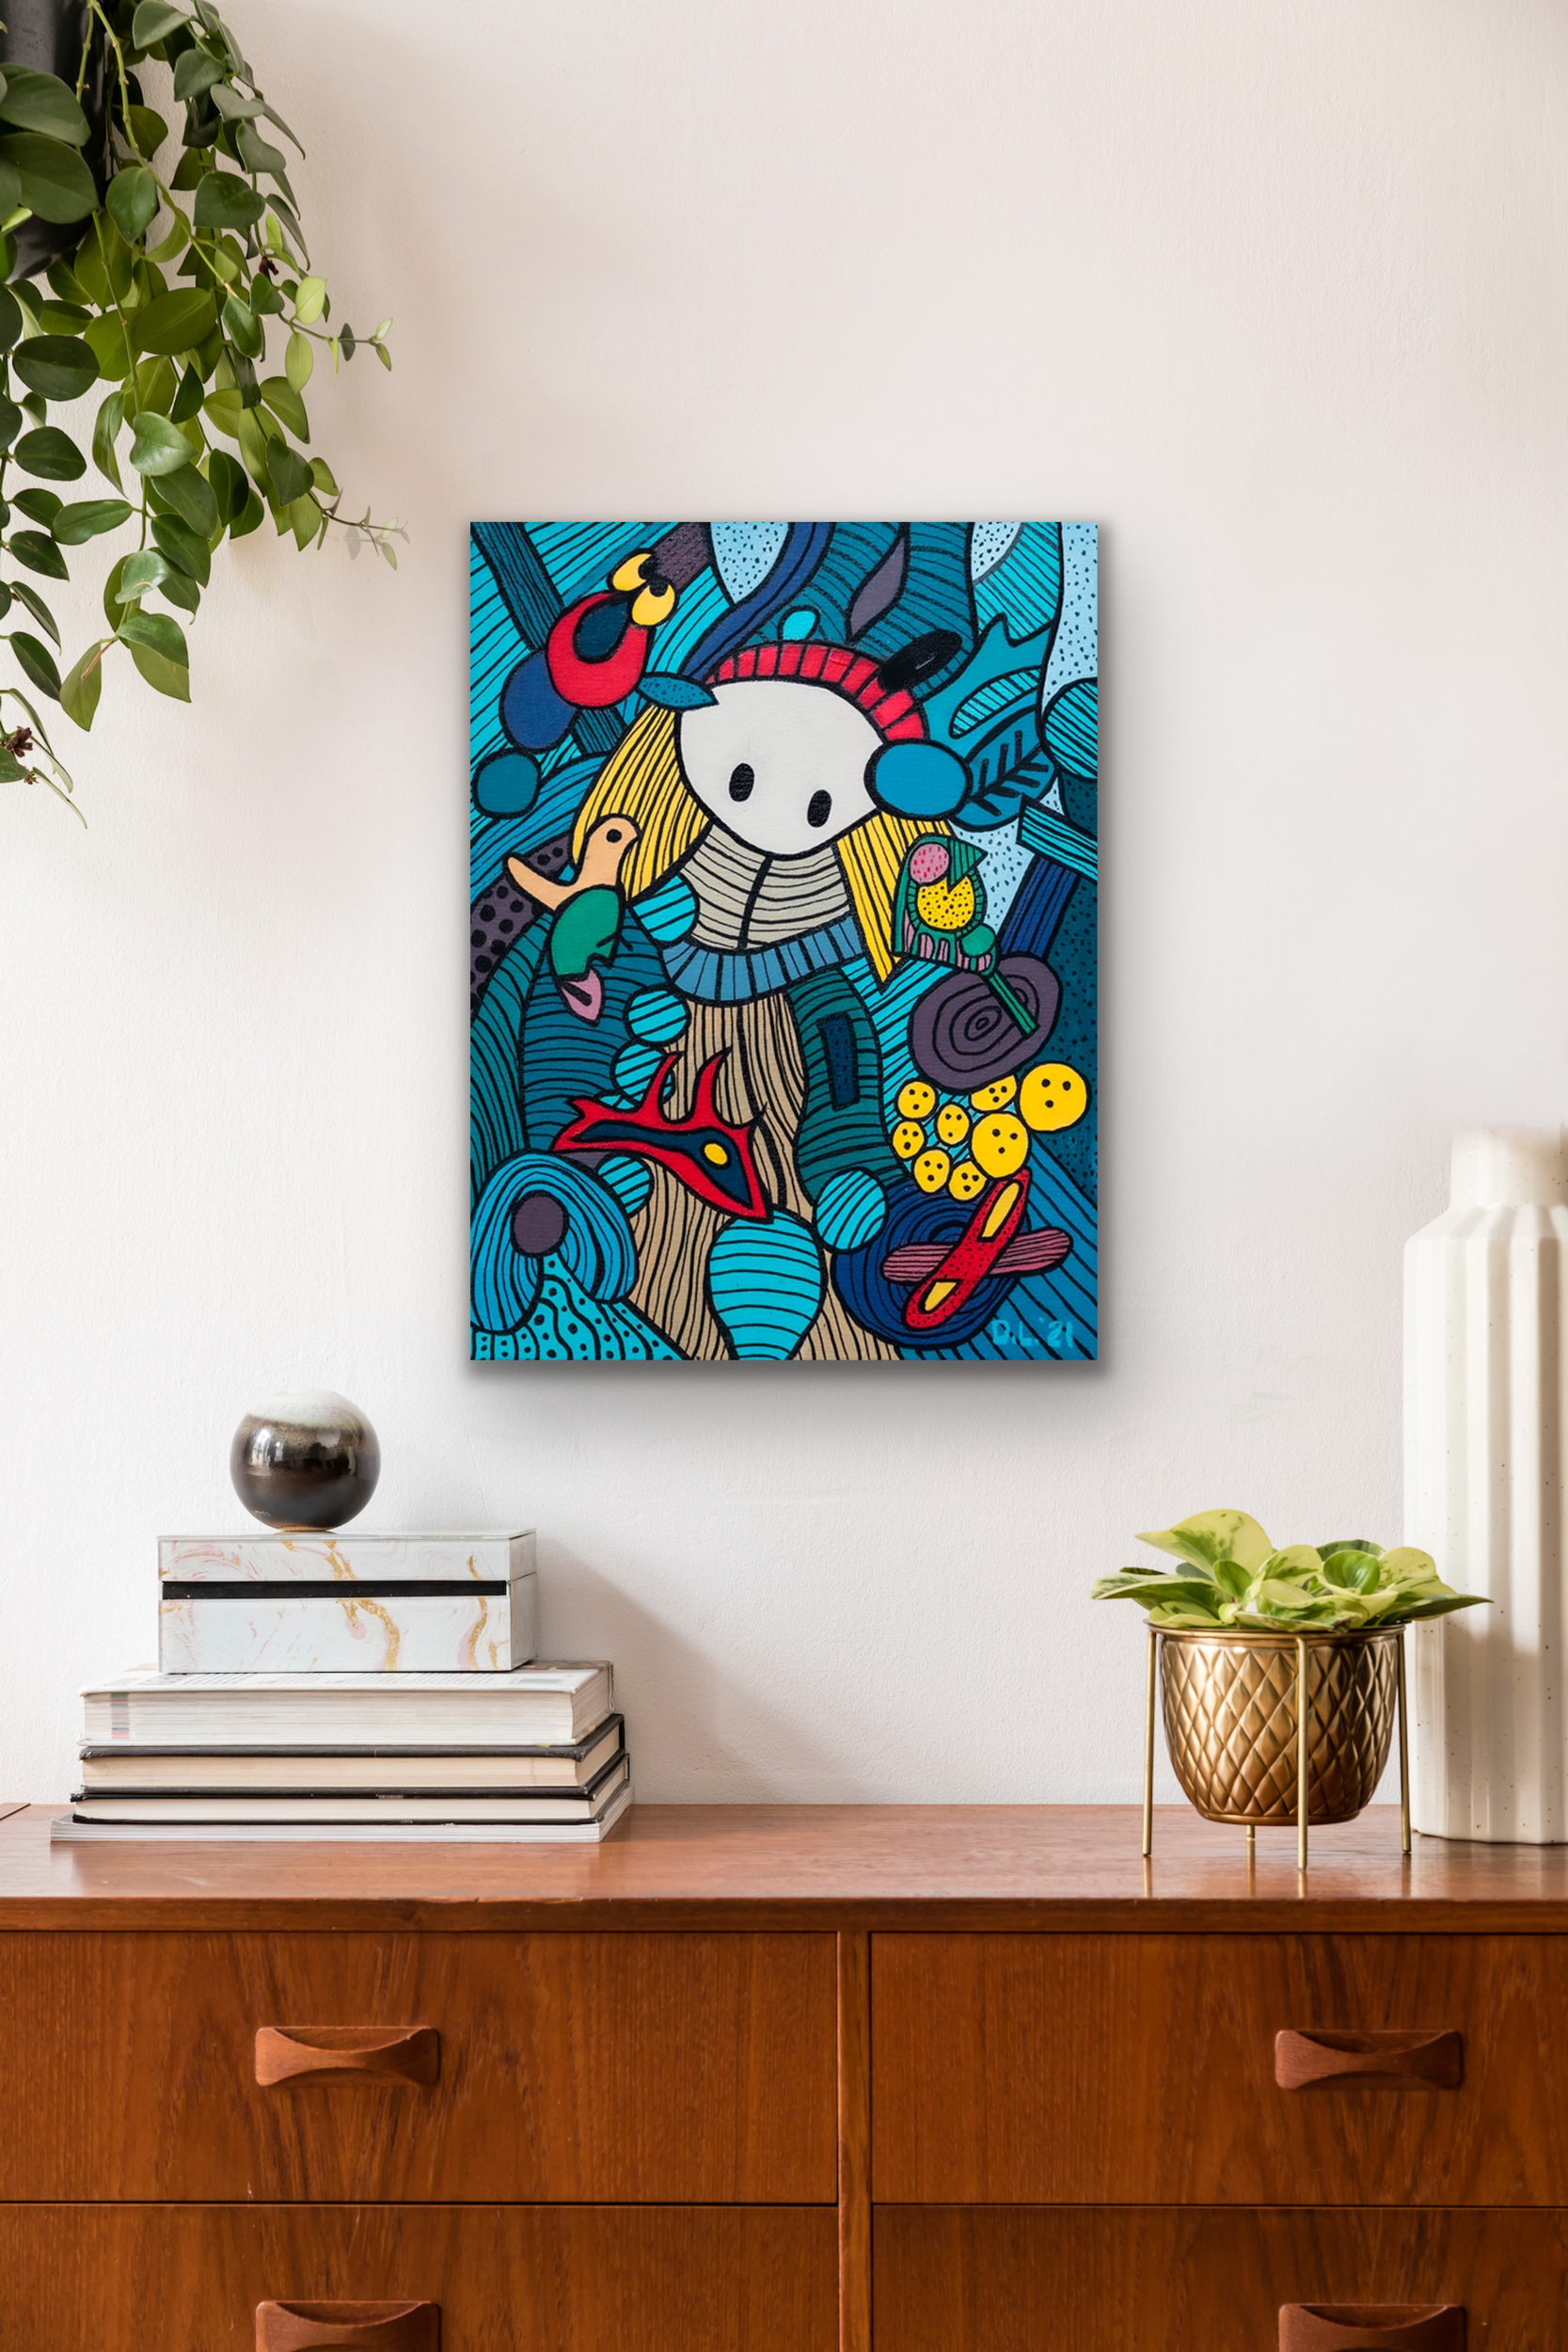 "Little Red Riding Hood" artwork will look great in your office, den or a child's room.